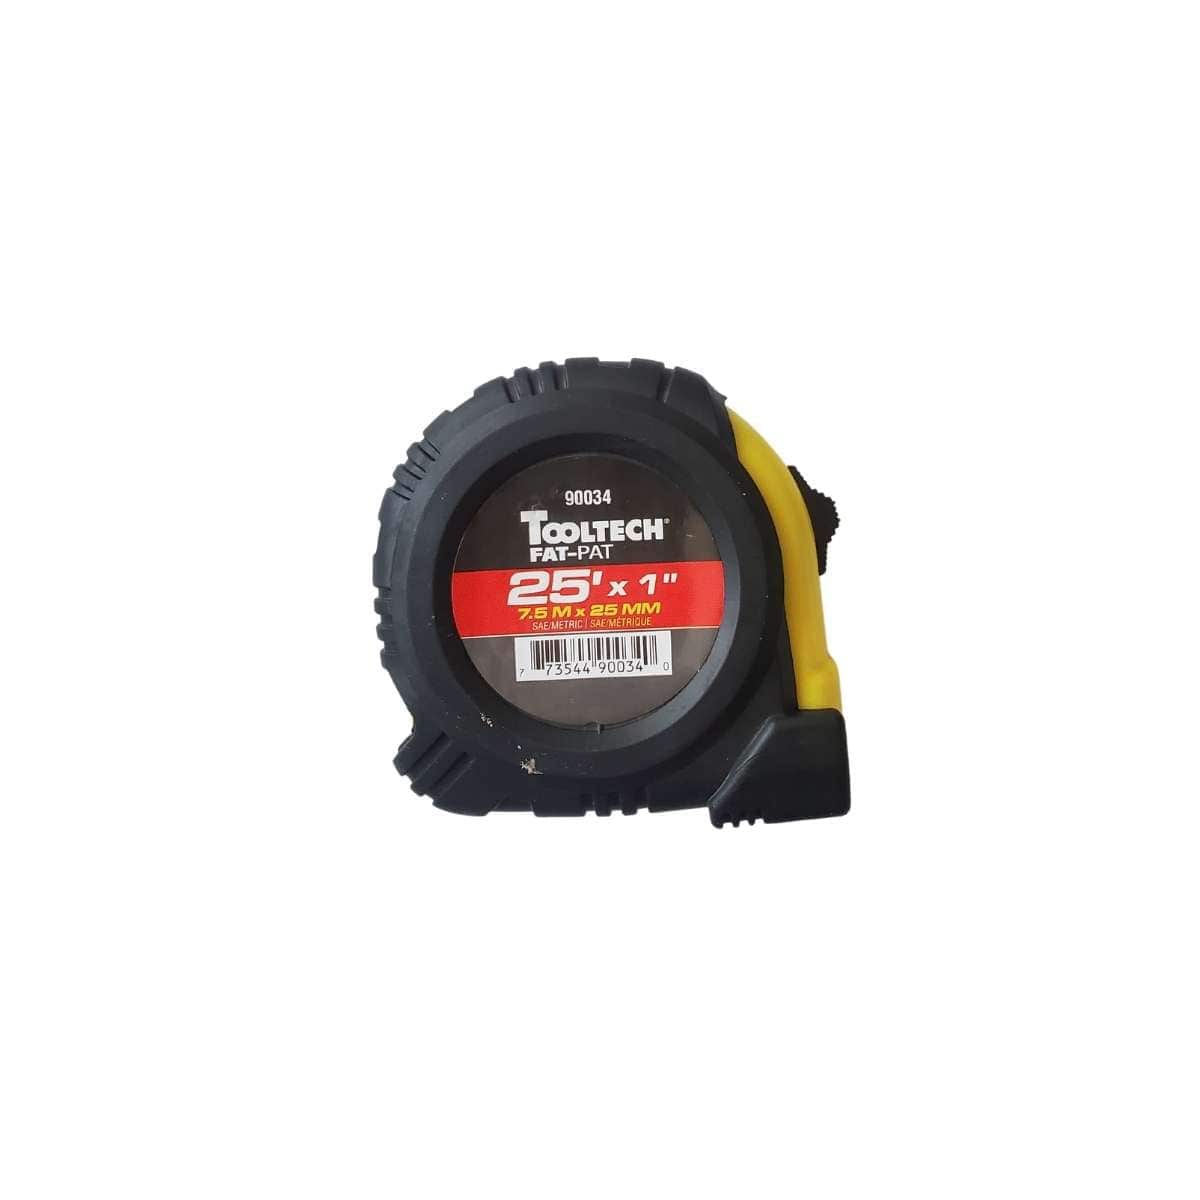 Toolway Tape Measure Tooltech - FatPat Tape Measure - 25' Blade - Item #90034